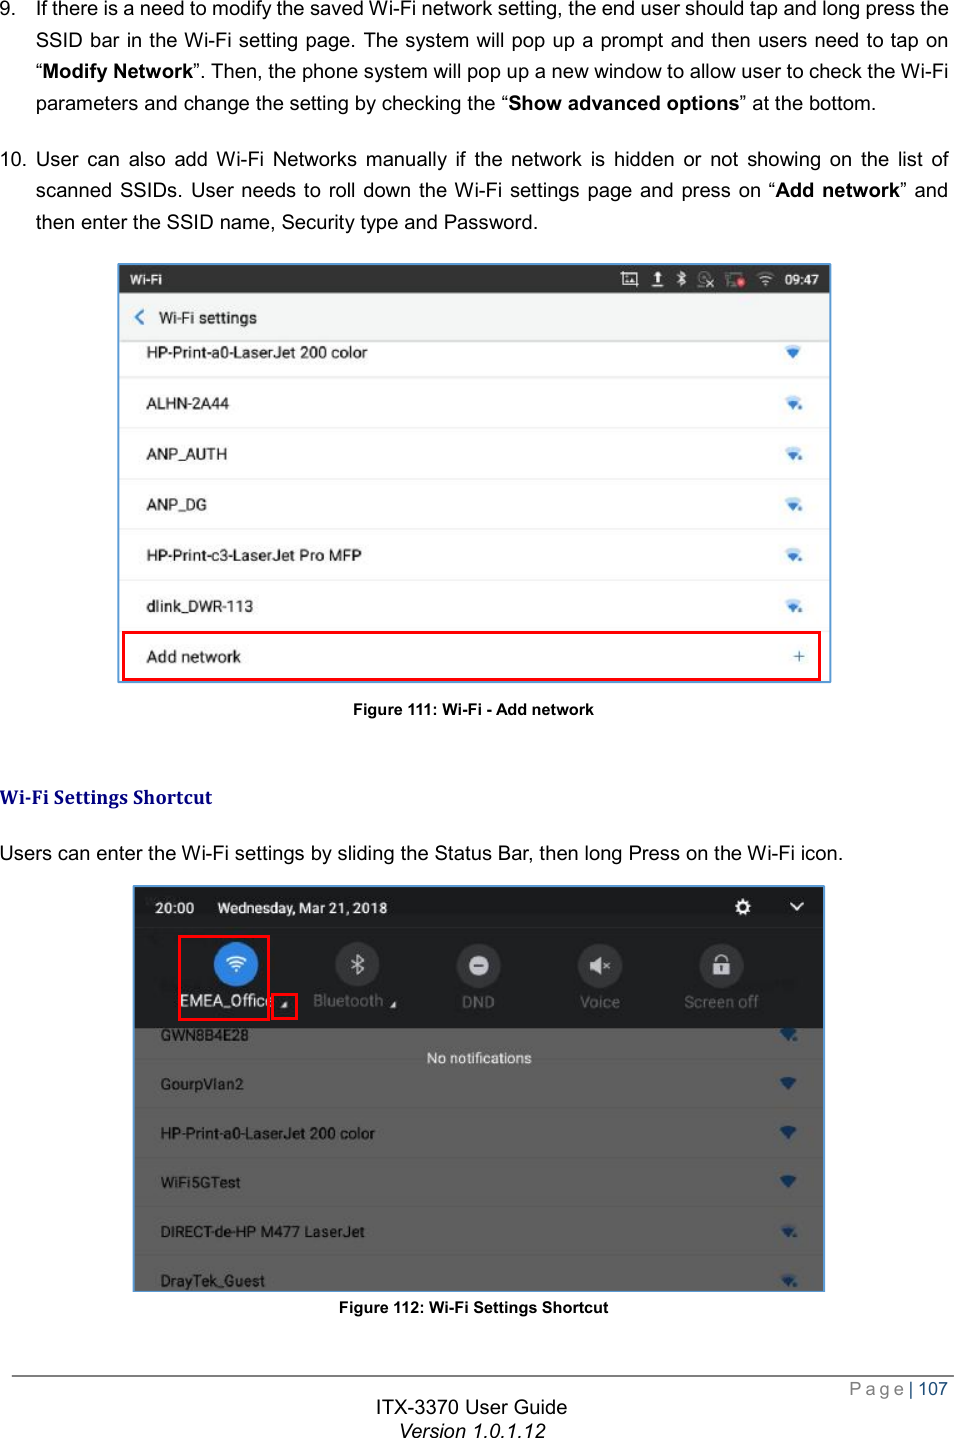  Page| 107  ITX-3370 User Guide Version 1.0.1.12  9. If there is a need to modify the saved Wi-Fi network setting, the end user should tap and long press the SSID bar in the Wi-Fi setting page. The system will pop up a prompt and then users need to tap on “Modify Network”. Then, the phone system will pop up a new window to allow user to check the Wi-Fi parameters and change the setting by checking the “Show advanced options” at the bottom. 10. User can also add Wi-Fi Networks manually if the network is hidden or not showing on the list of scanned SSIDs. User needs to roll down the Wi-Fi settings page and press on “Add network” and then enter the SSID name, Security type and Password.  Figure 111: Wi-Fi - Add network  Wi-Fi Settings Shortcut Users can enter the Wi-Fi settings by sliding the Status Bar, then long Press on the Wi-Fi icon.  Figure 112: Wi-Fi Settings Shortcut  